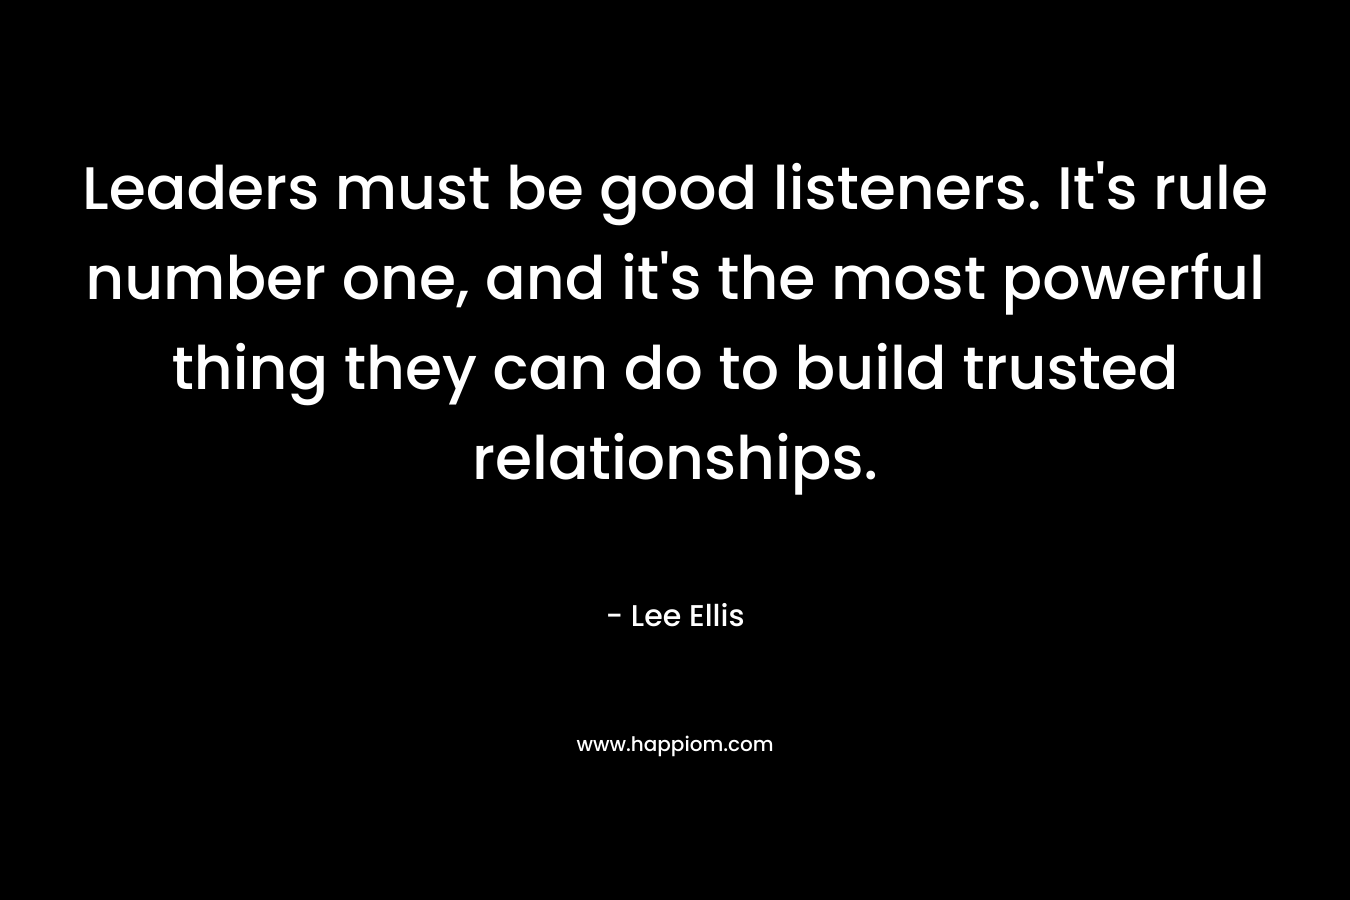 Leaders must be good listeners. It's rule number one, and it's the most powerful thing they can do to build trusted relationships.